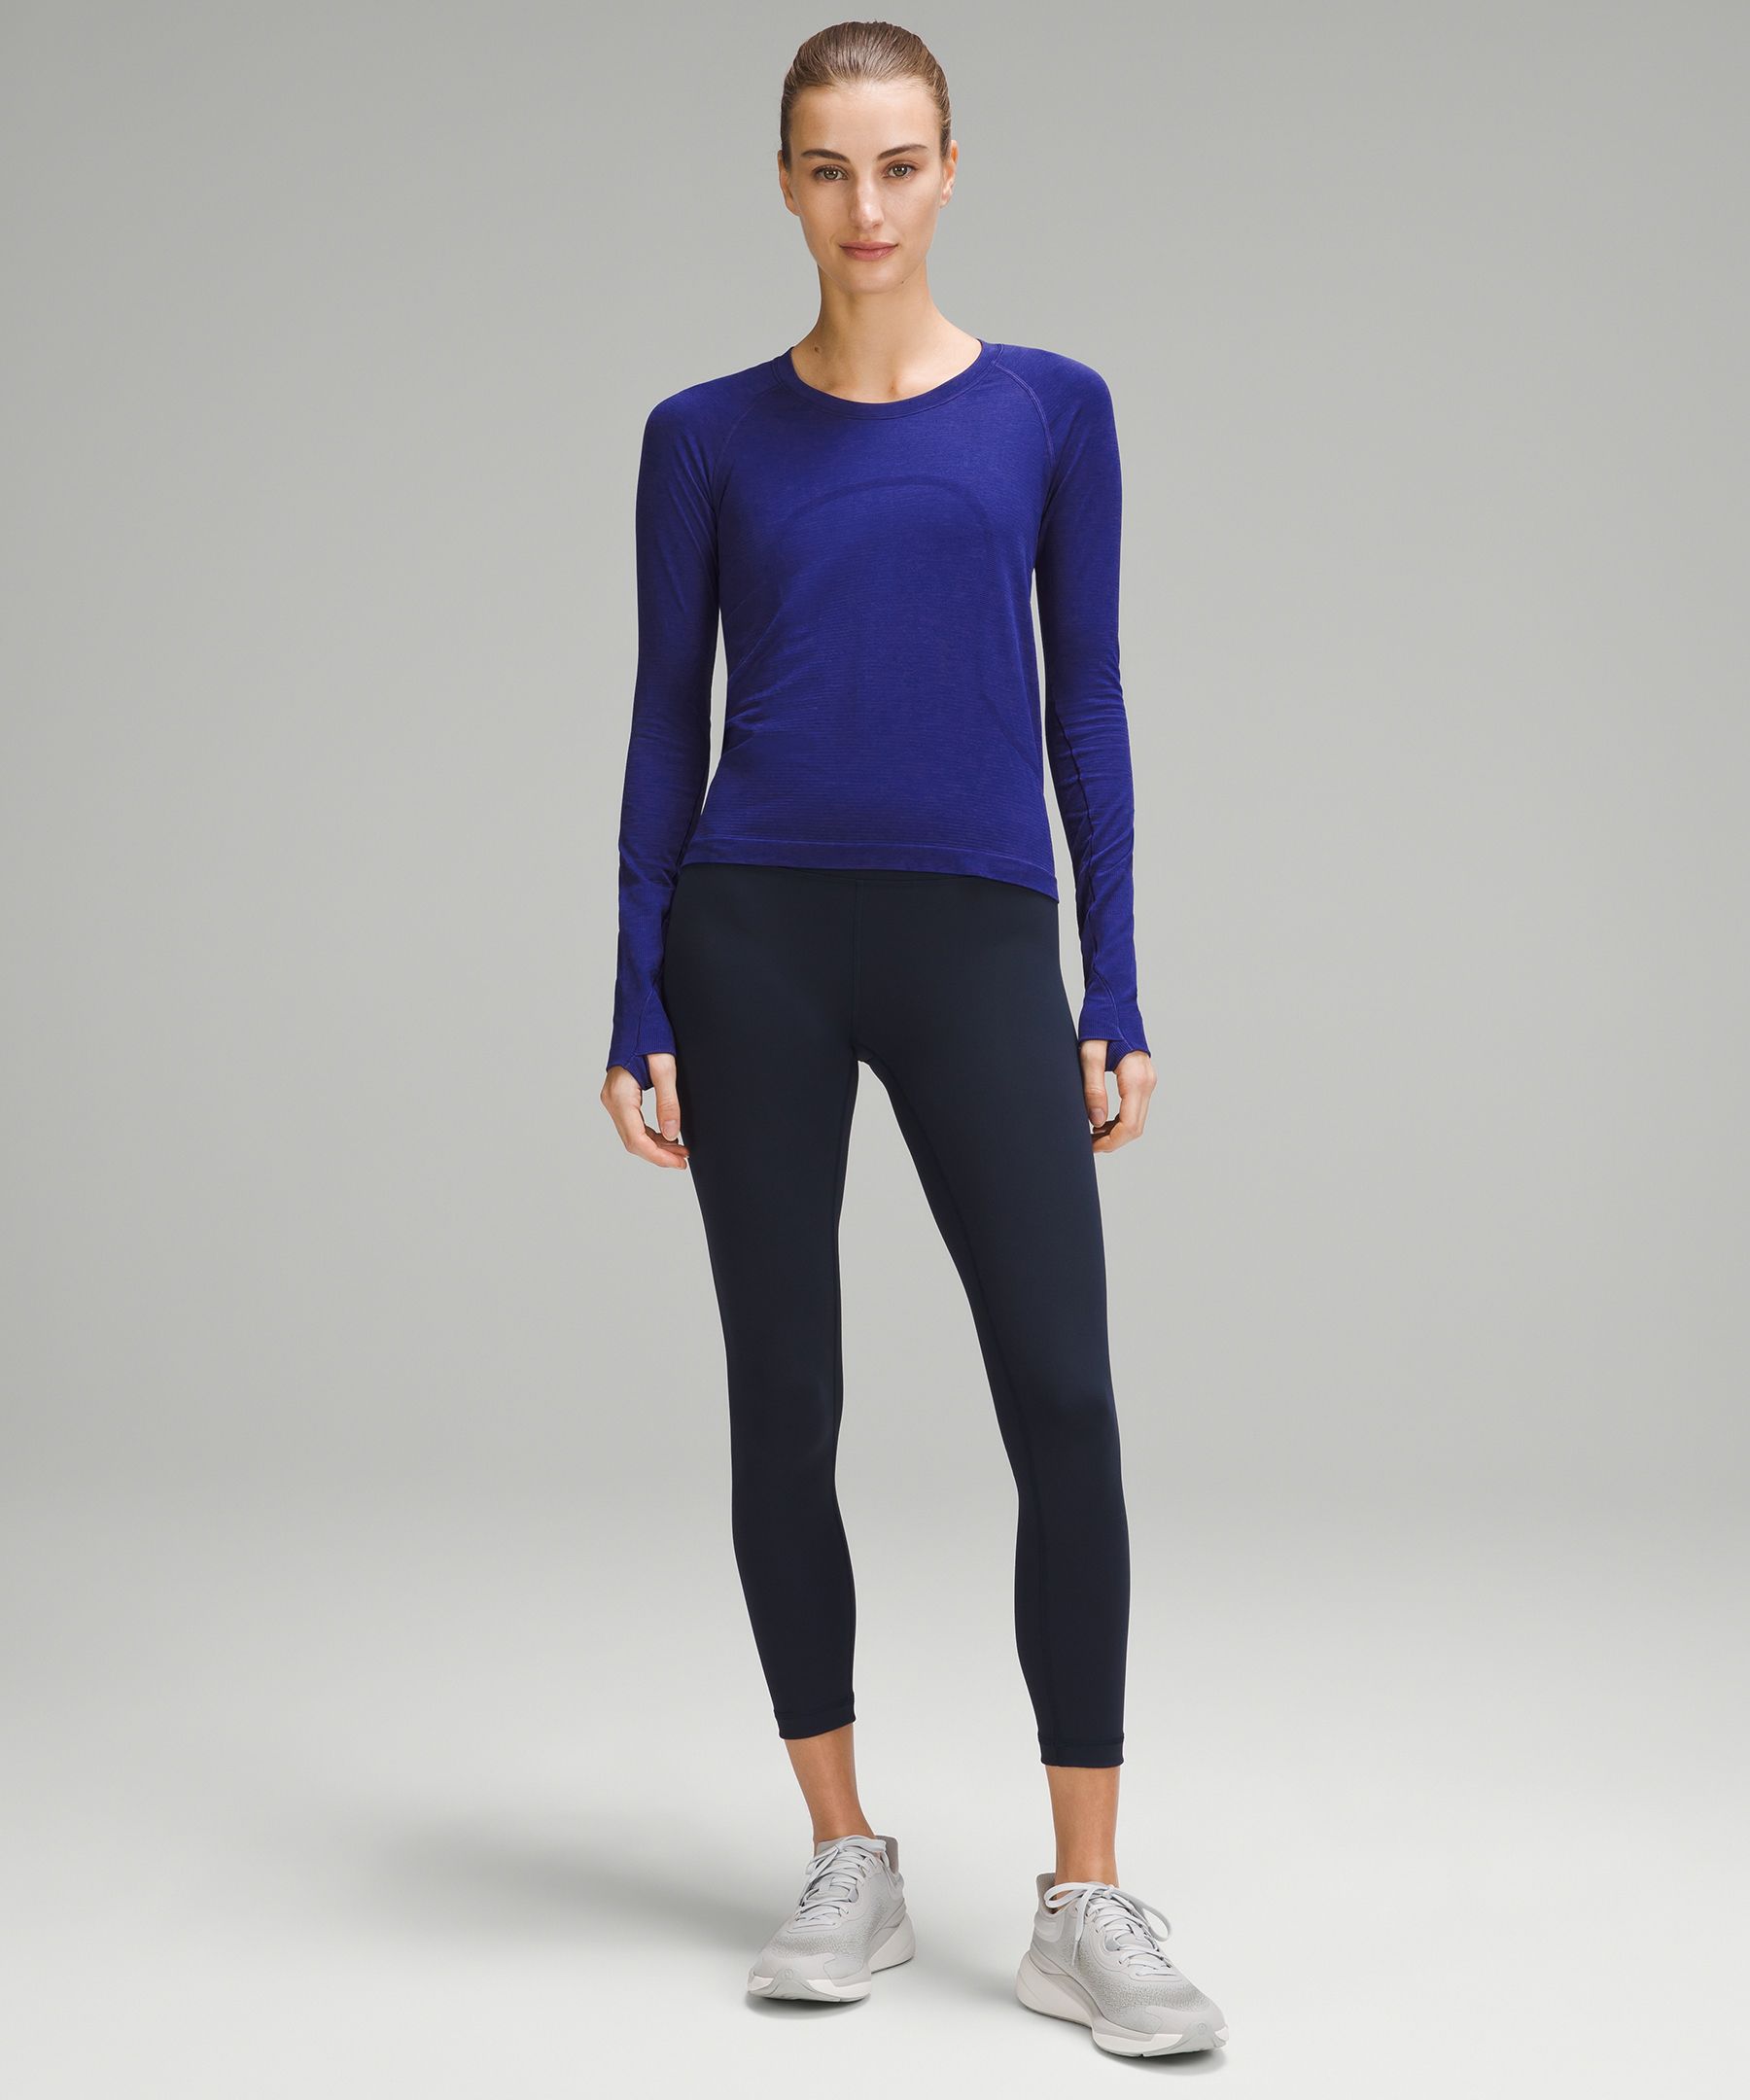 Brand New WithTag Lululemon Swiftly Tech LS 2.0 *Race LW3DOBS in Women's  size 12